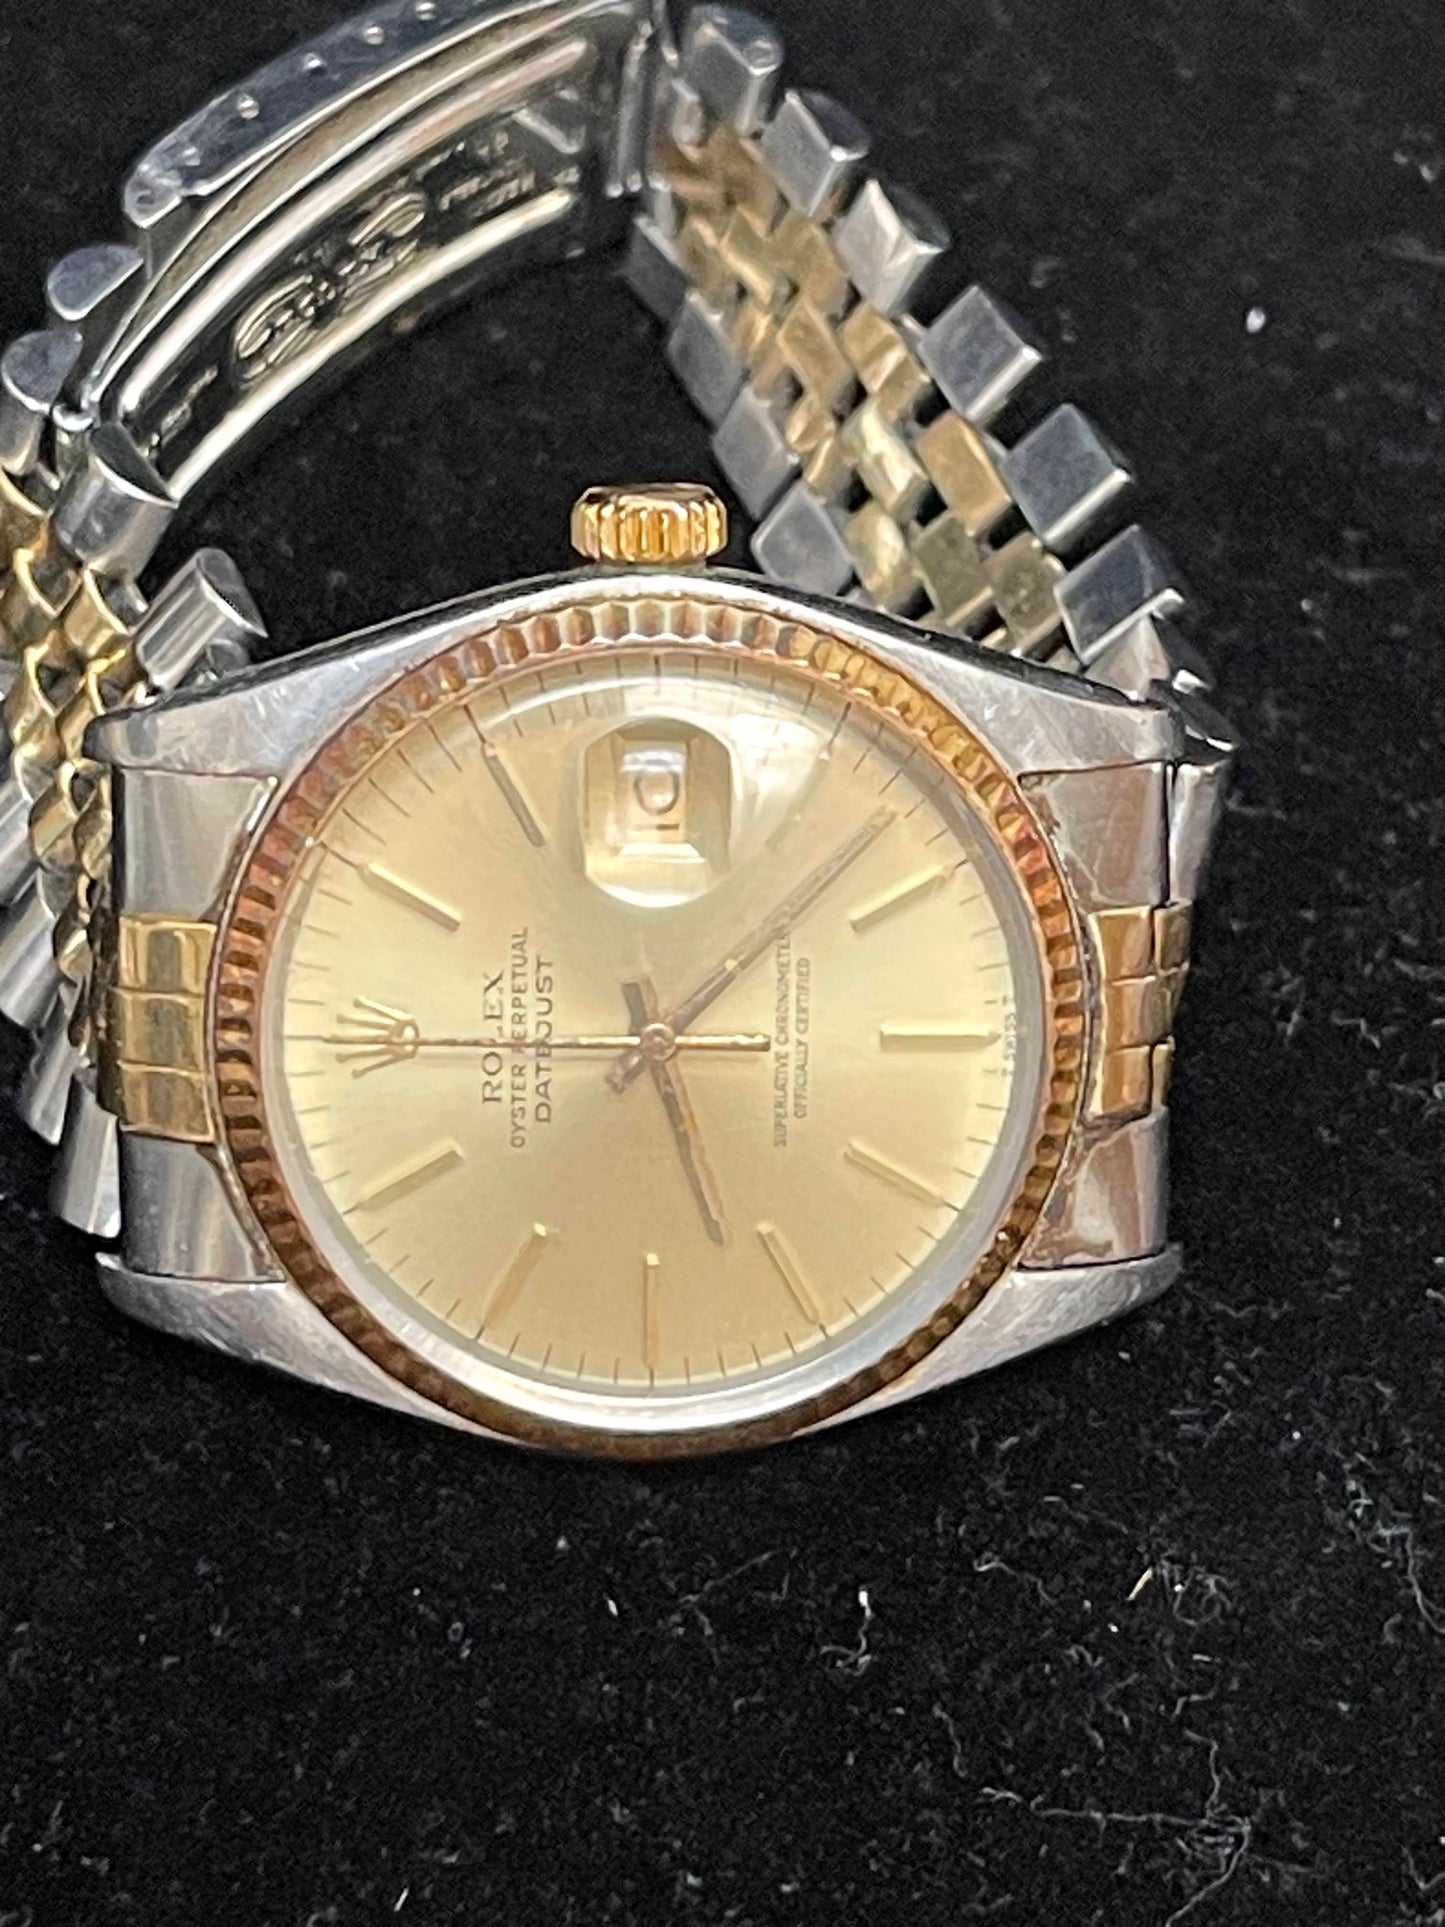 1978 Rolex Datejust 16013 Champagne Dial TT Jubilee No Papers 36mm